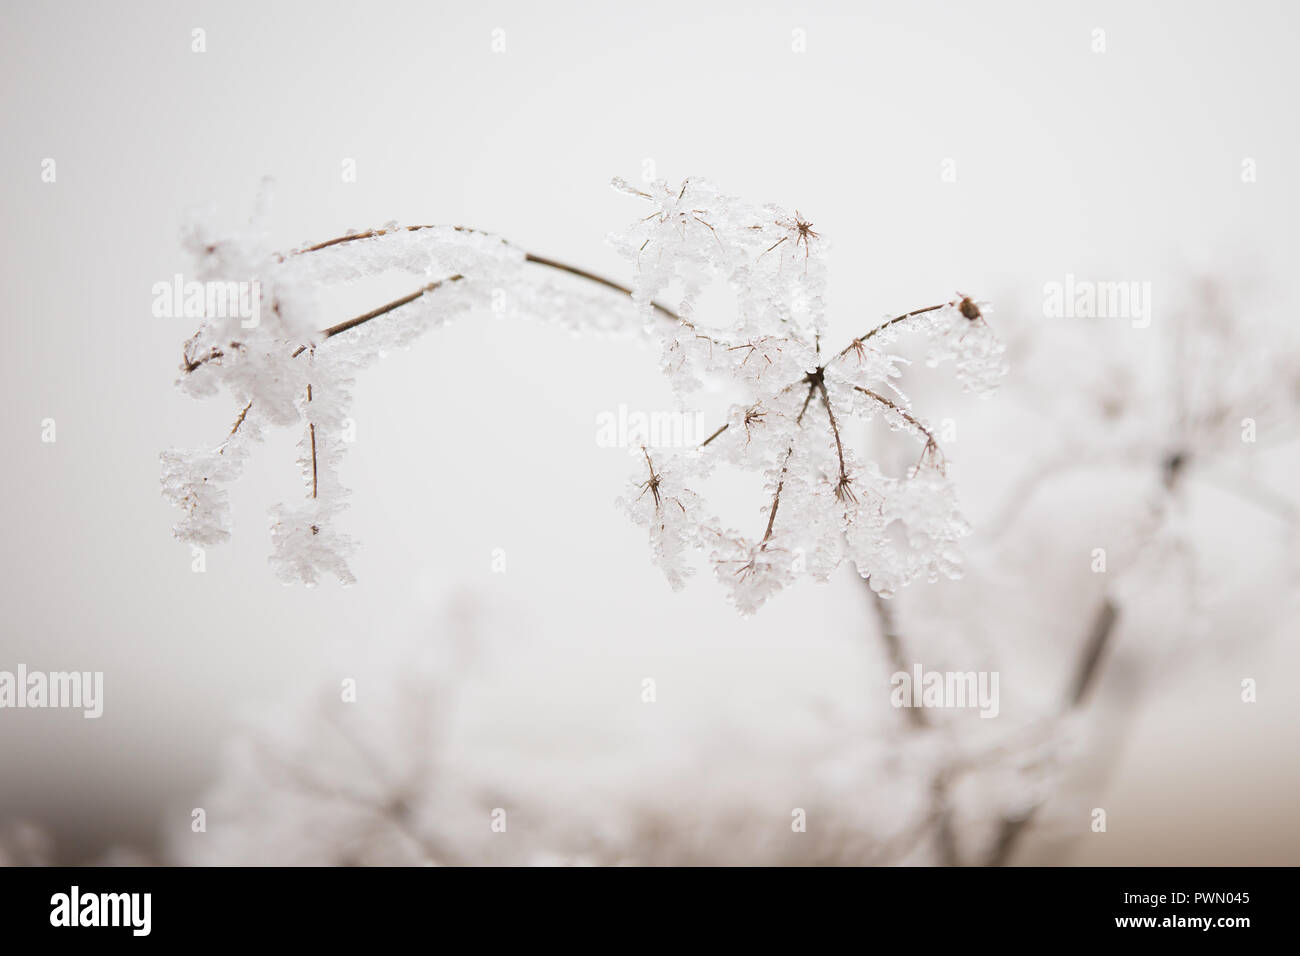 Queen anne's lace flowers covered in beautiful, white, icy frost on a winter day in Pennsylvania Stock Photo